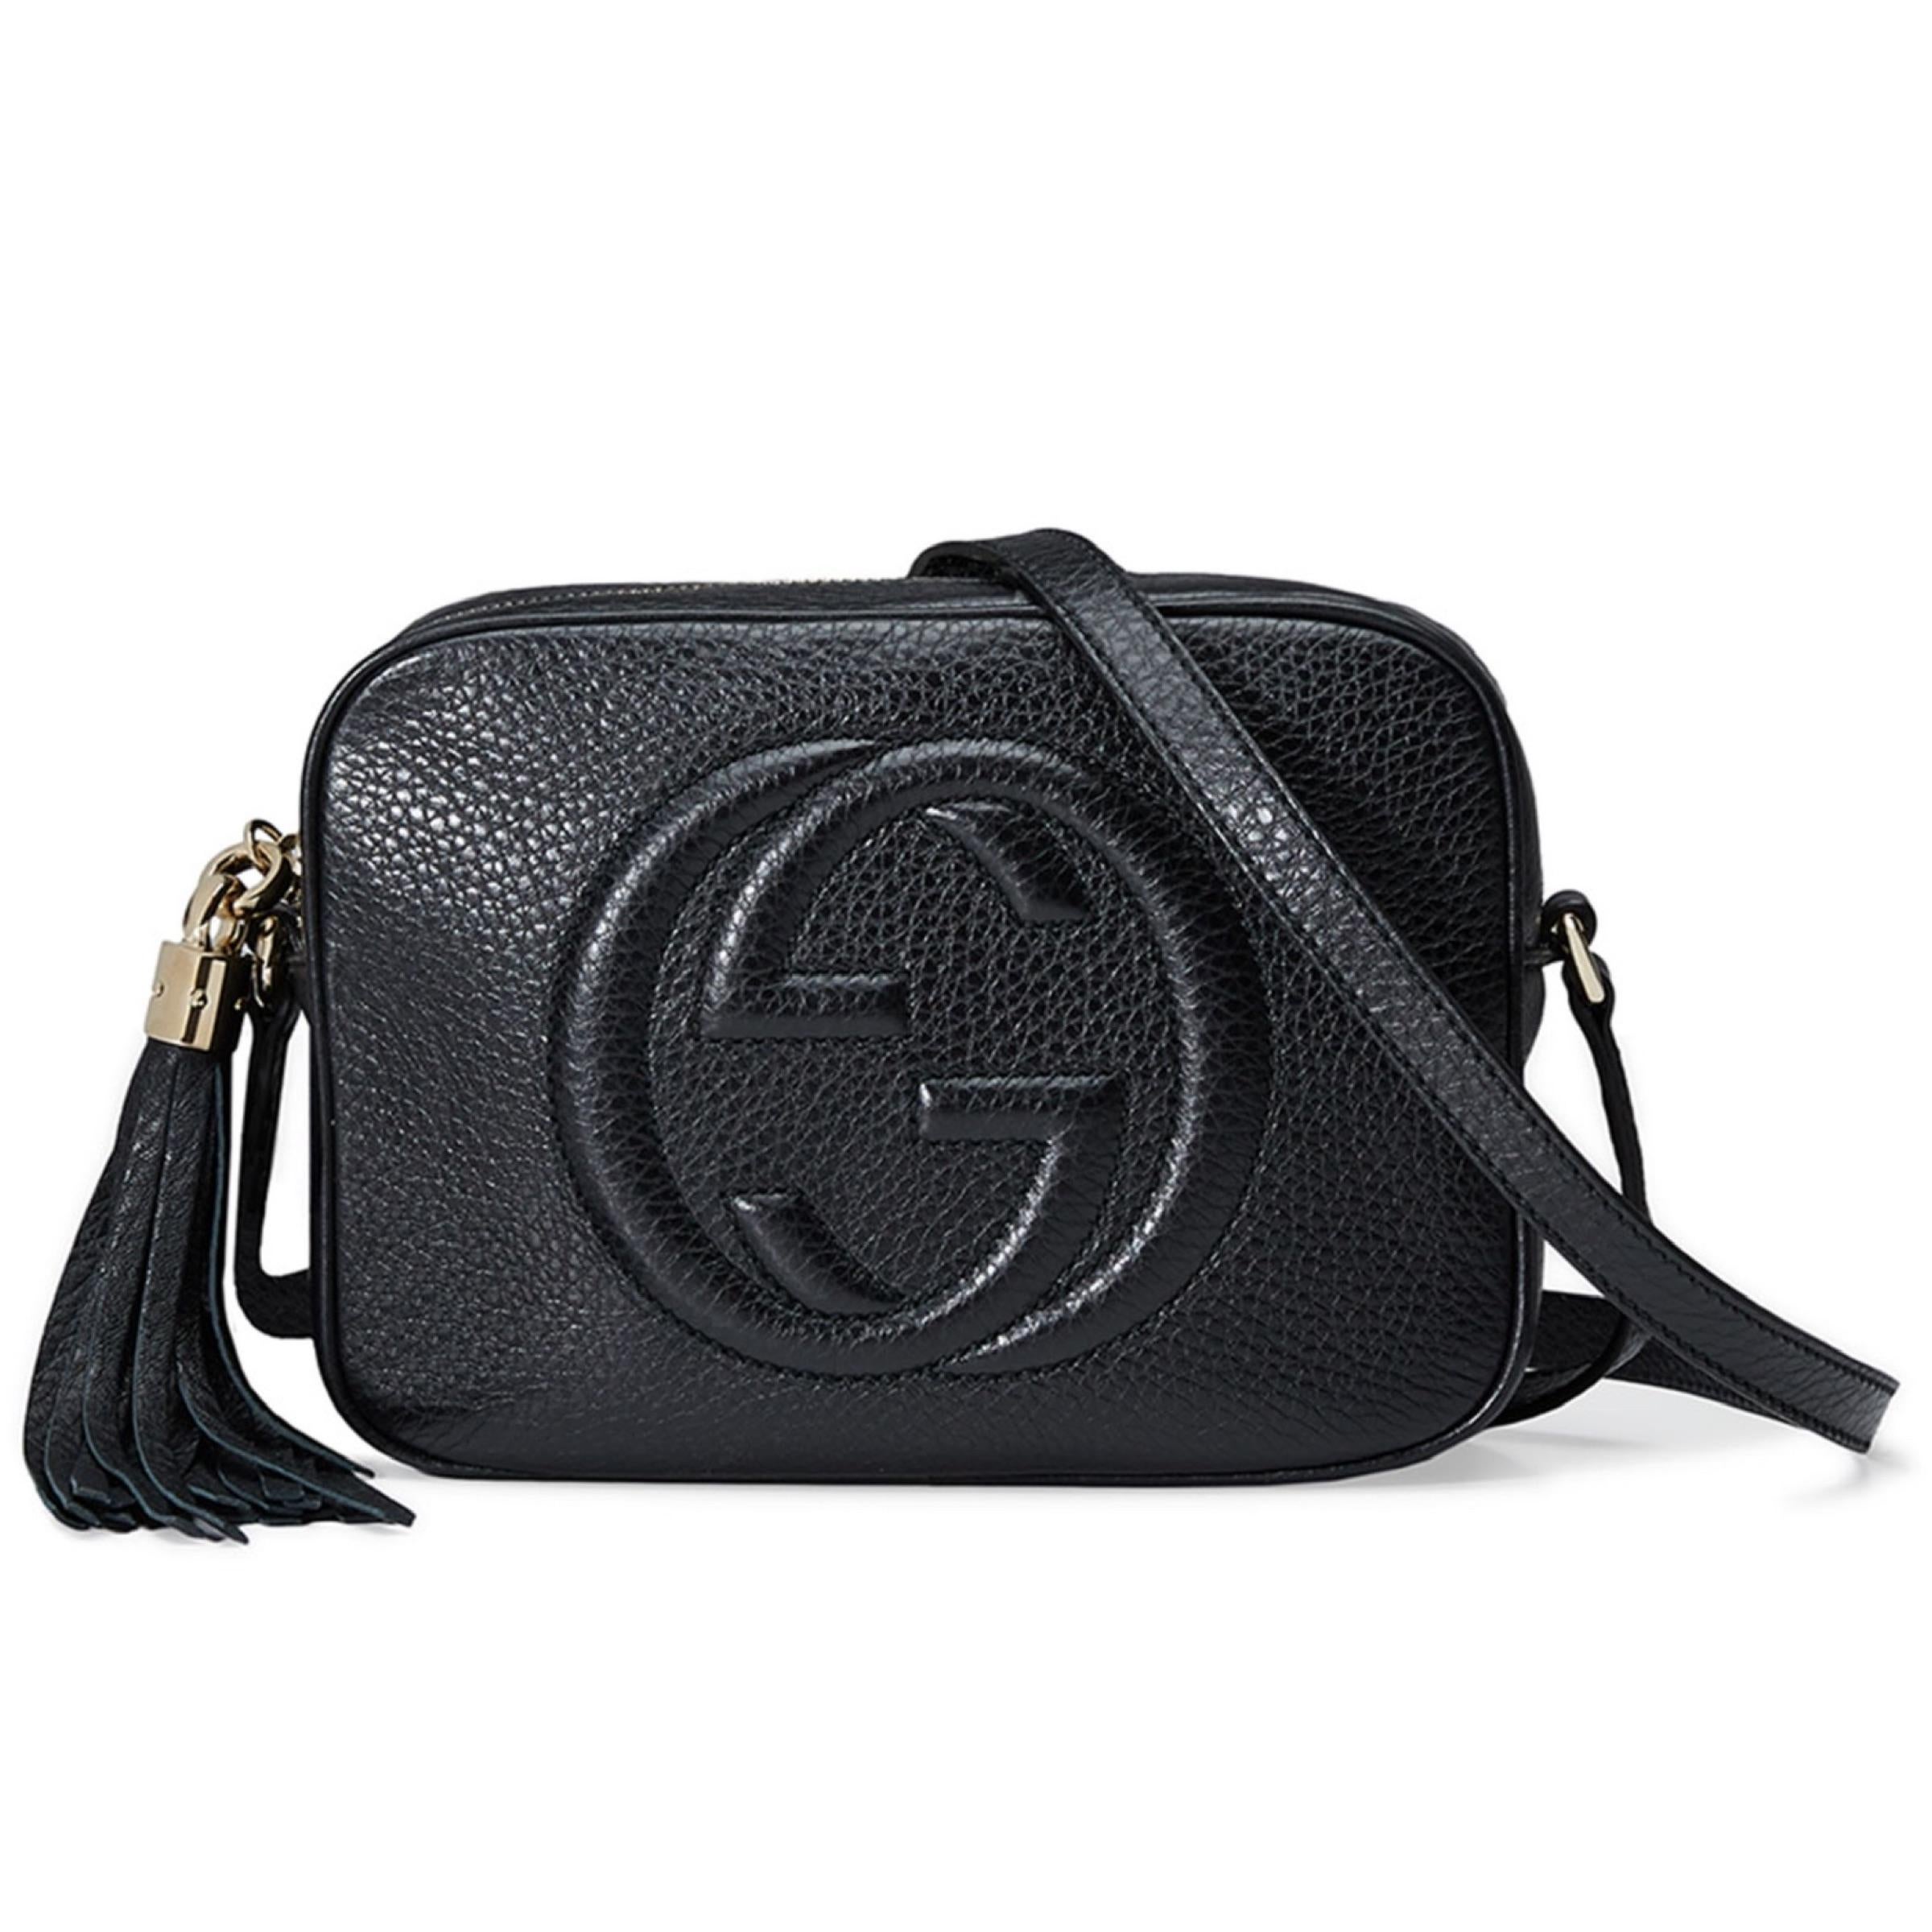 New Gucci Black Small Soho Disco Leather Crossbody Bag

Authenticity Guaranteed

DETAILS
Brand: Gucci
Gender: Women
Category: Crossbody bag
Condition: Brand new
Color: Black
Material: Leather
Front Gucci soho logo
Gold-tone hardware
Top zip